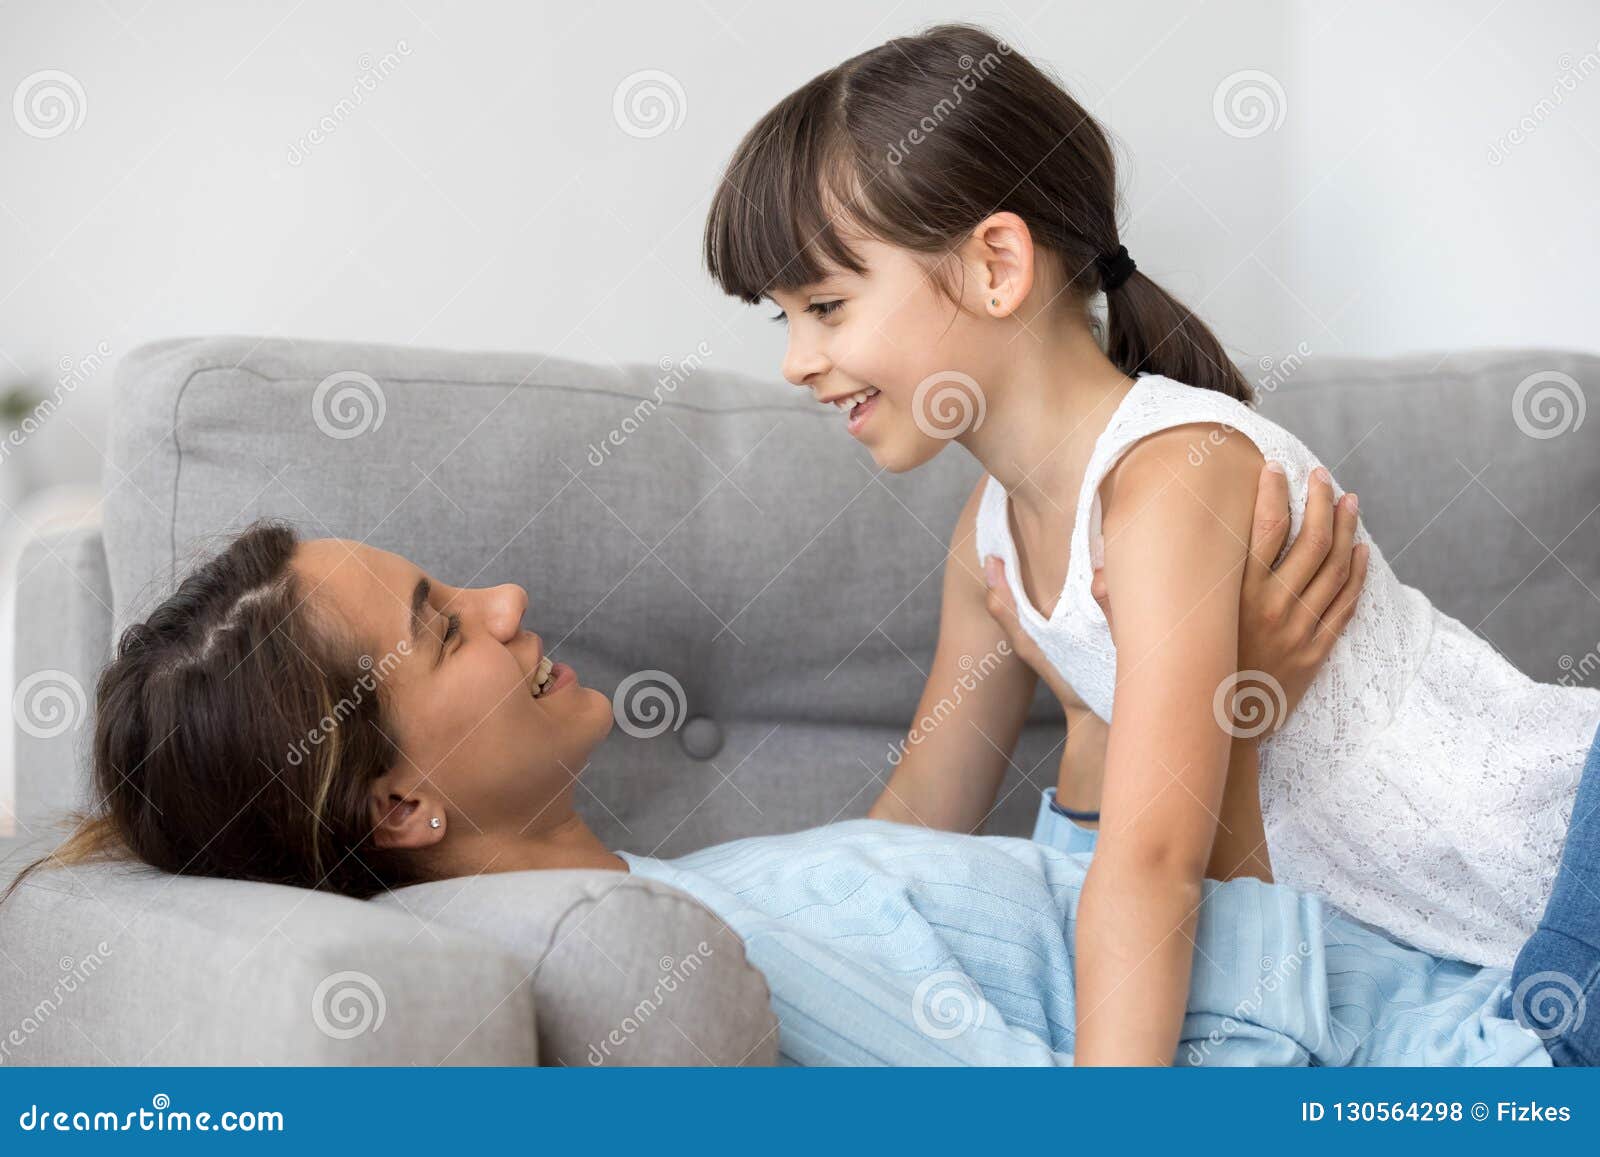 Mother Talking With Daughter Lying Together On Sofa Stock